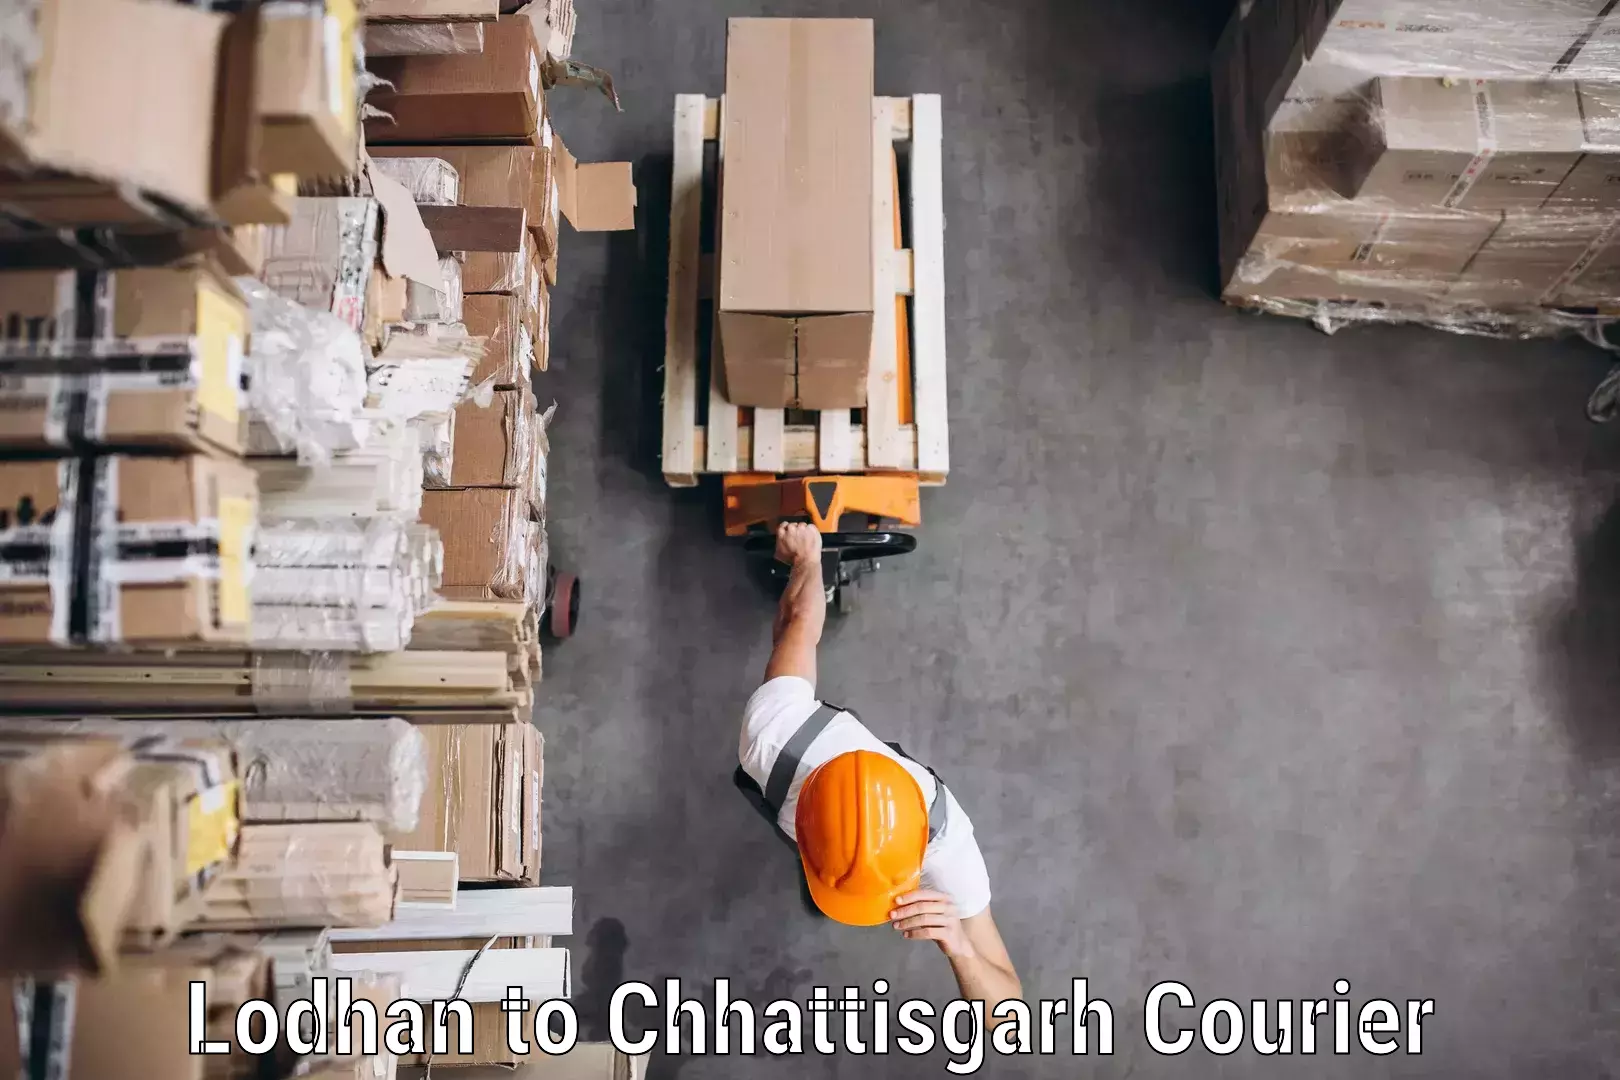 State-of-the-art courier technology Lodhan to Chhattisgarh